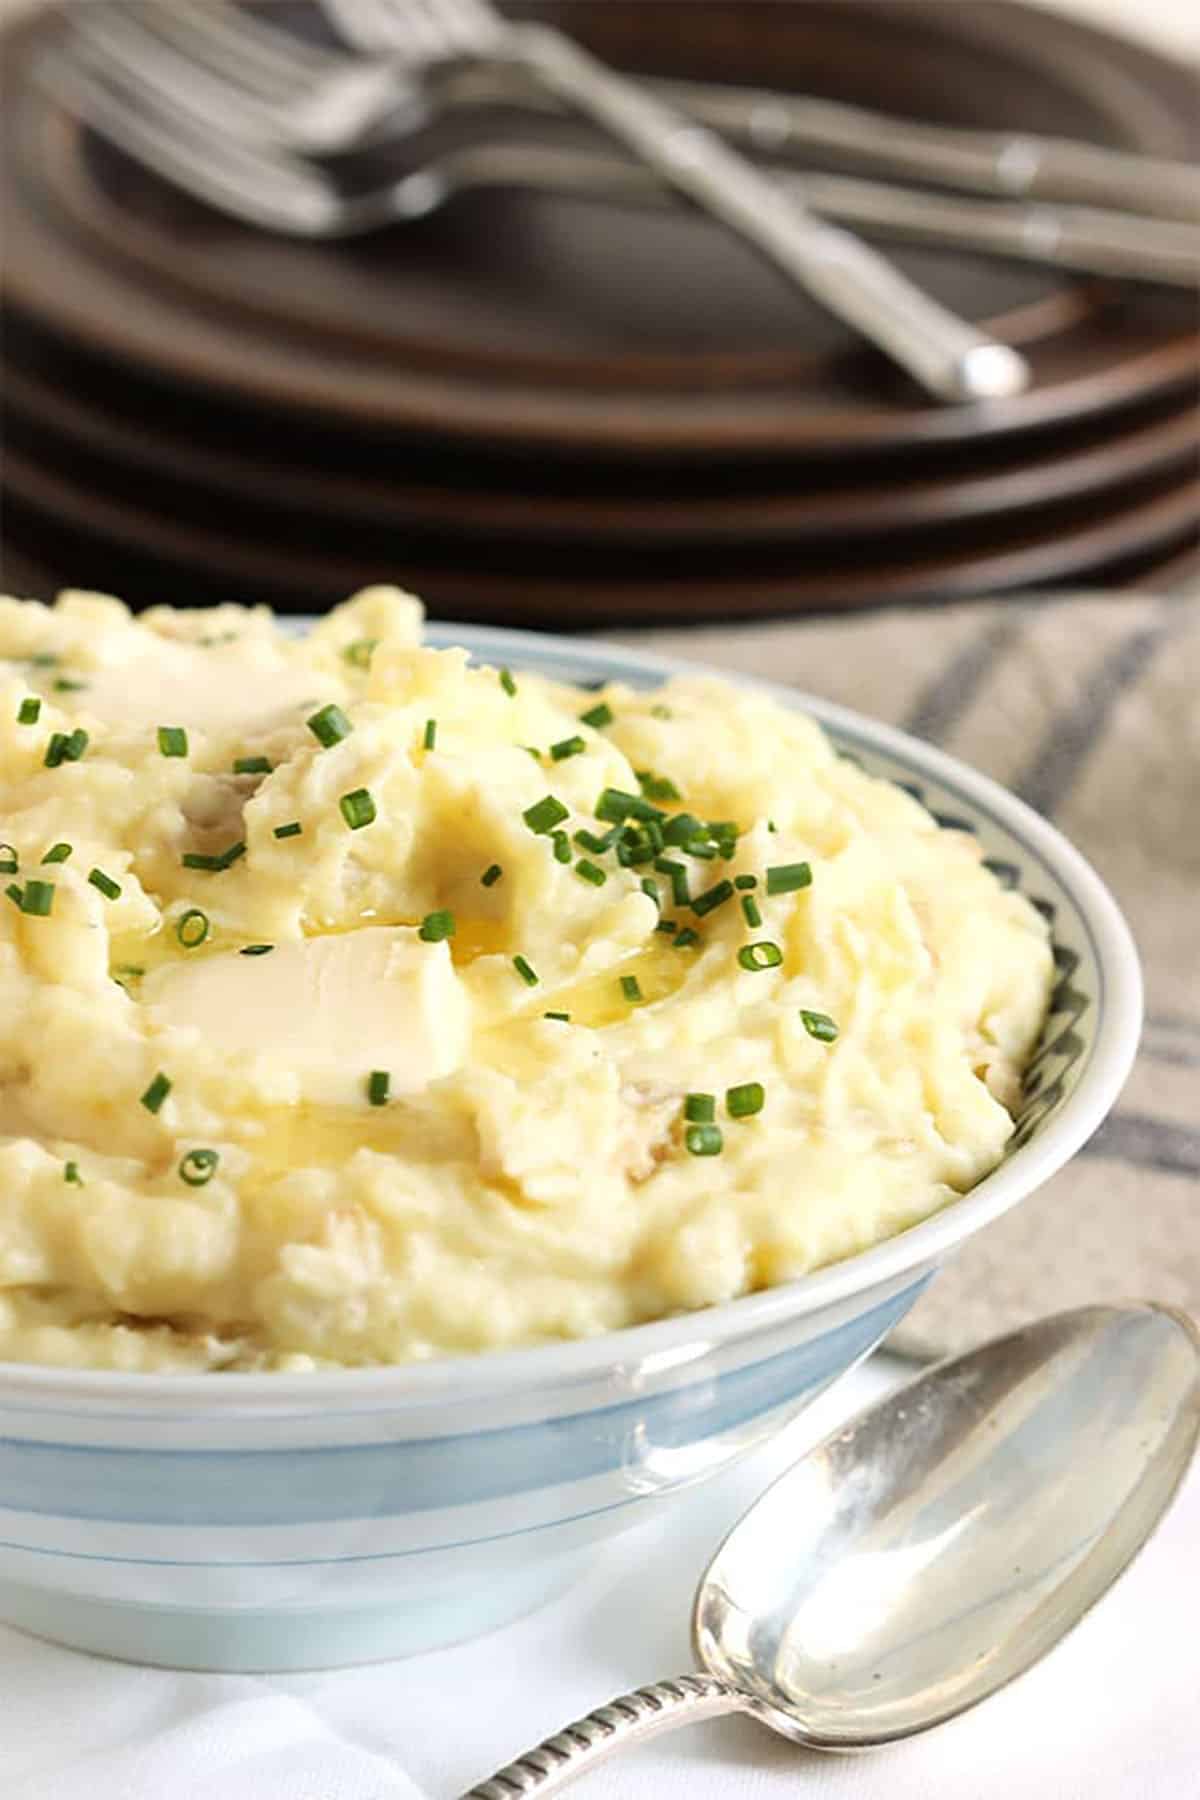 Mashed Potatoes topped with butter and chives in a blue and white stripped bowl with brown plates stacked in the background.